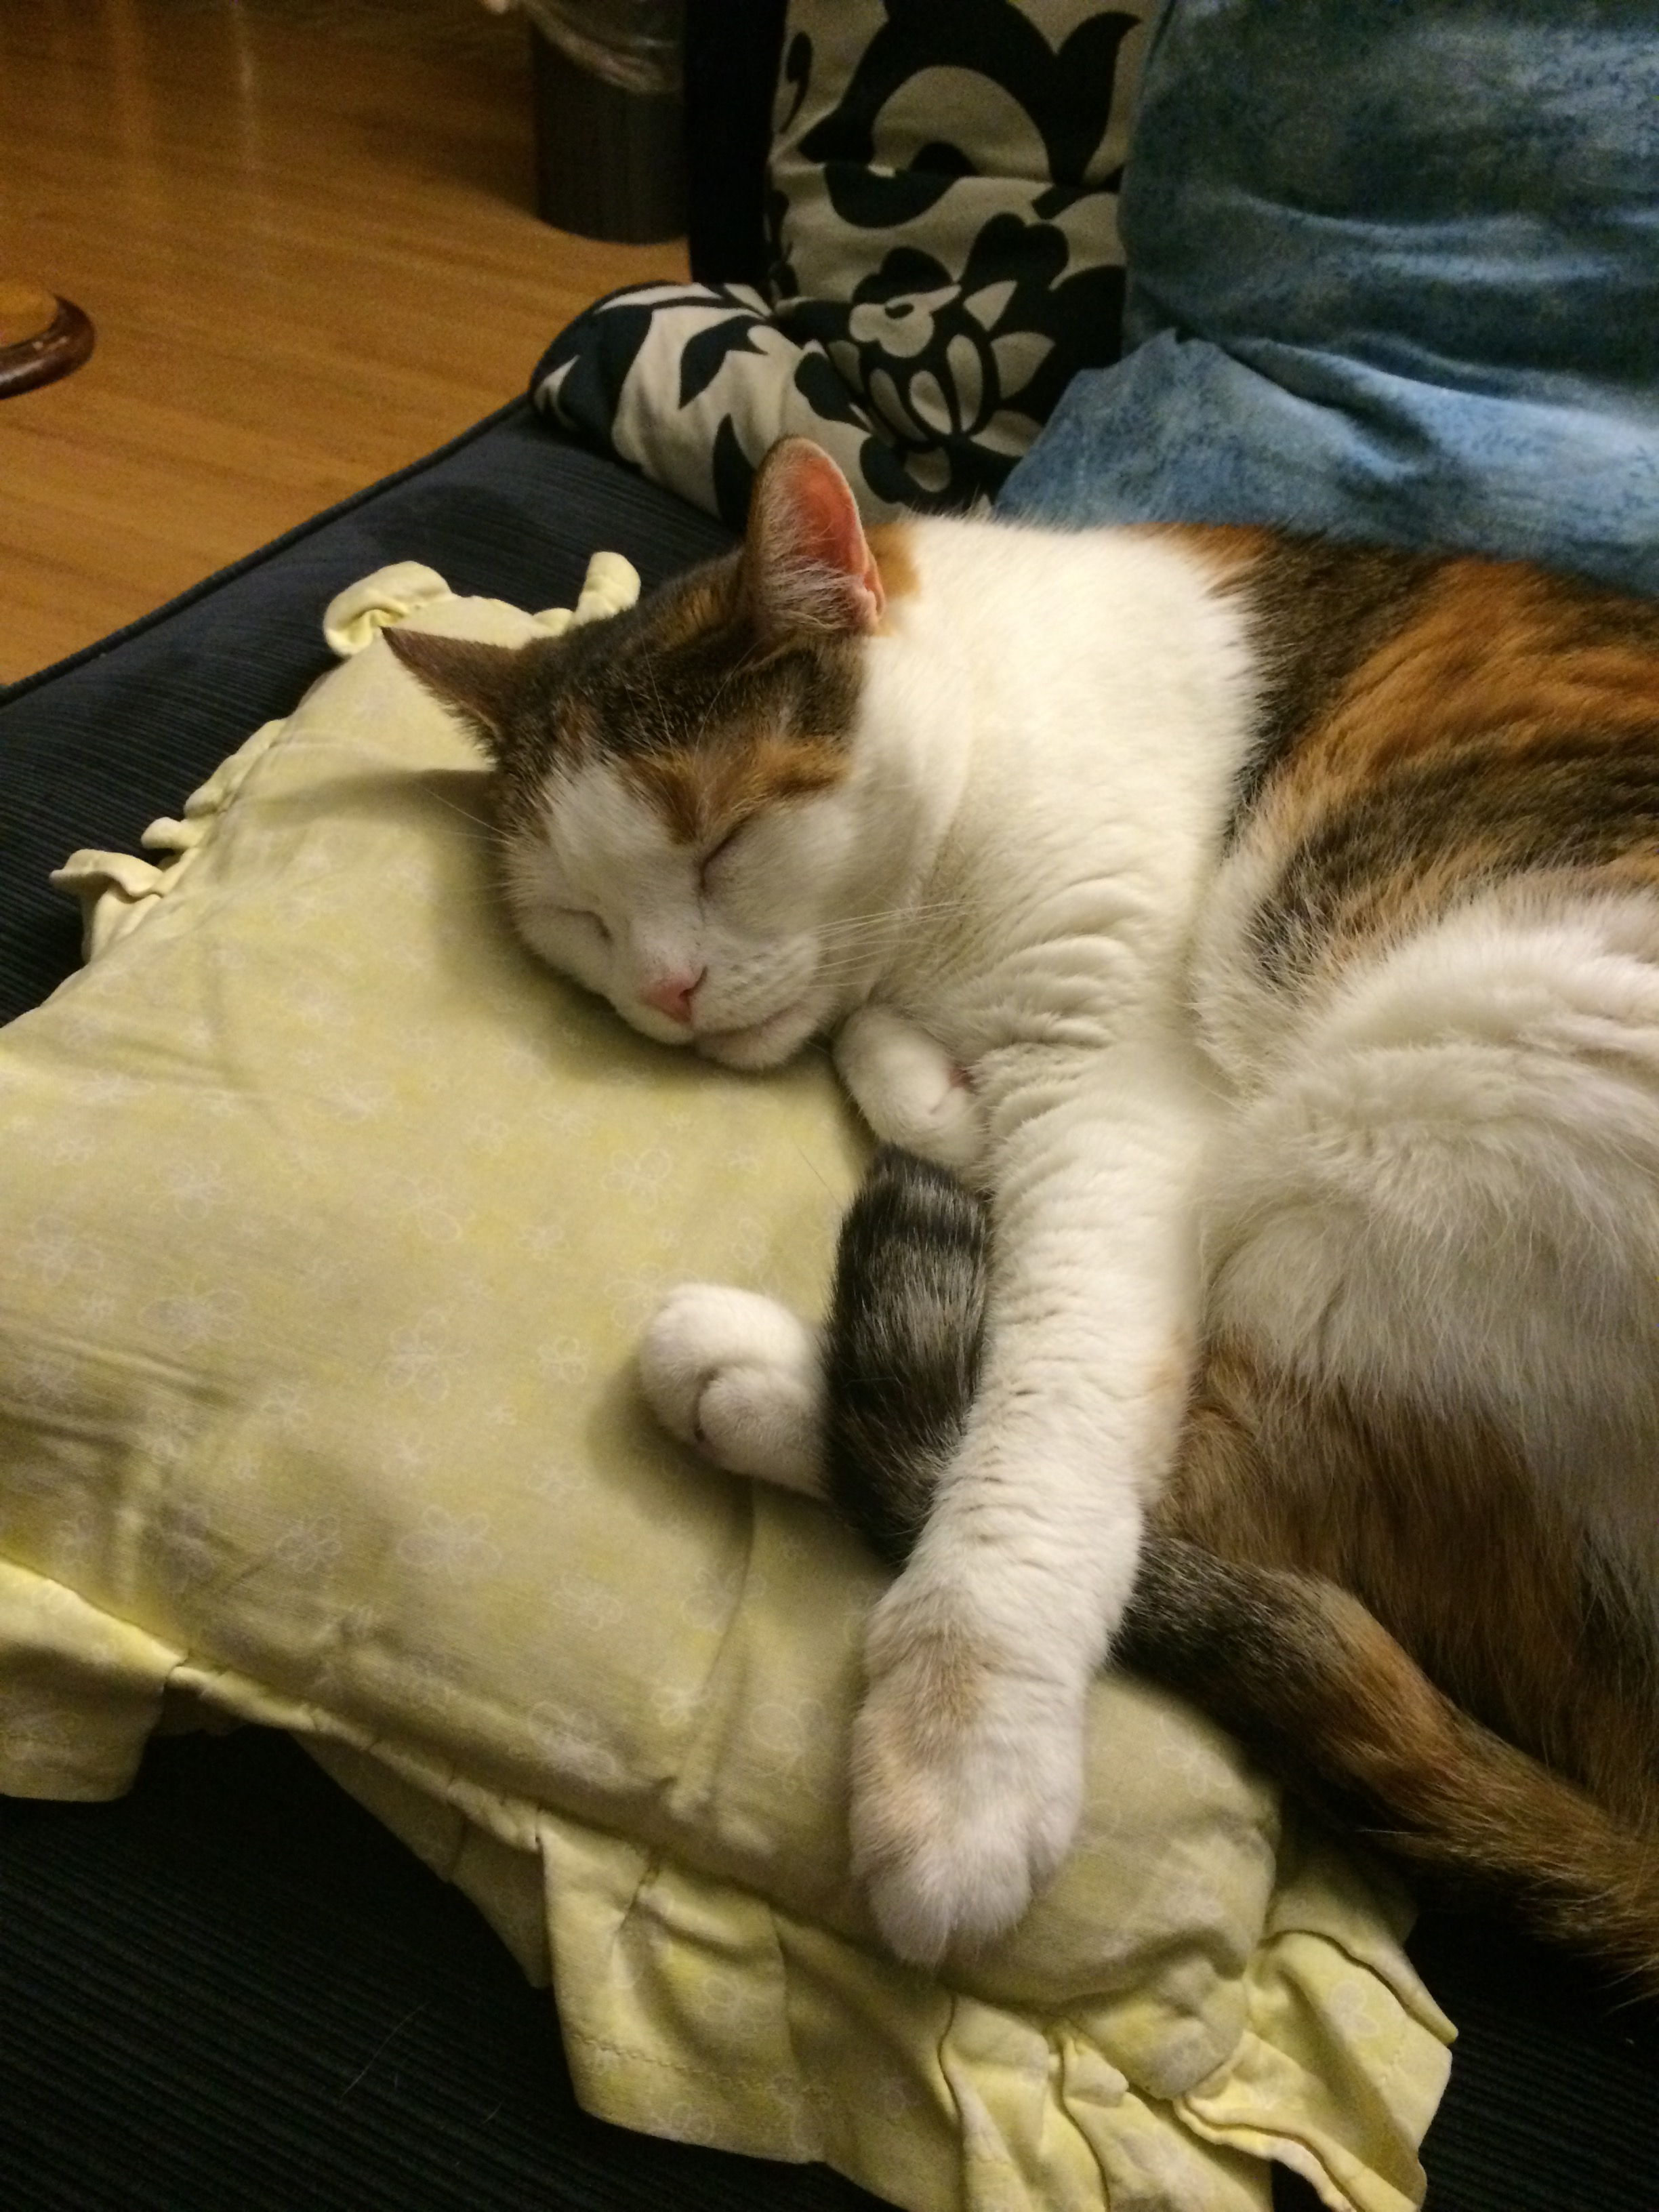 Calico cat sleeping on a yellow pillow